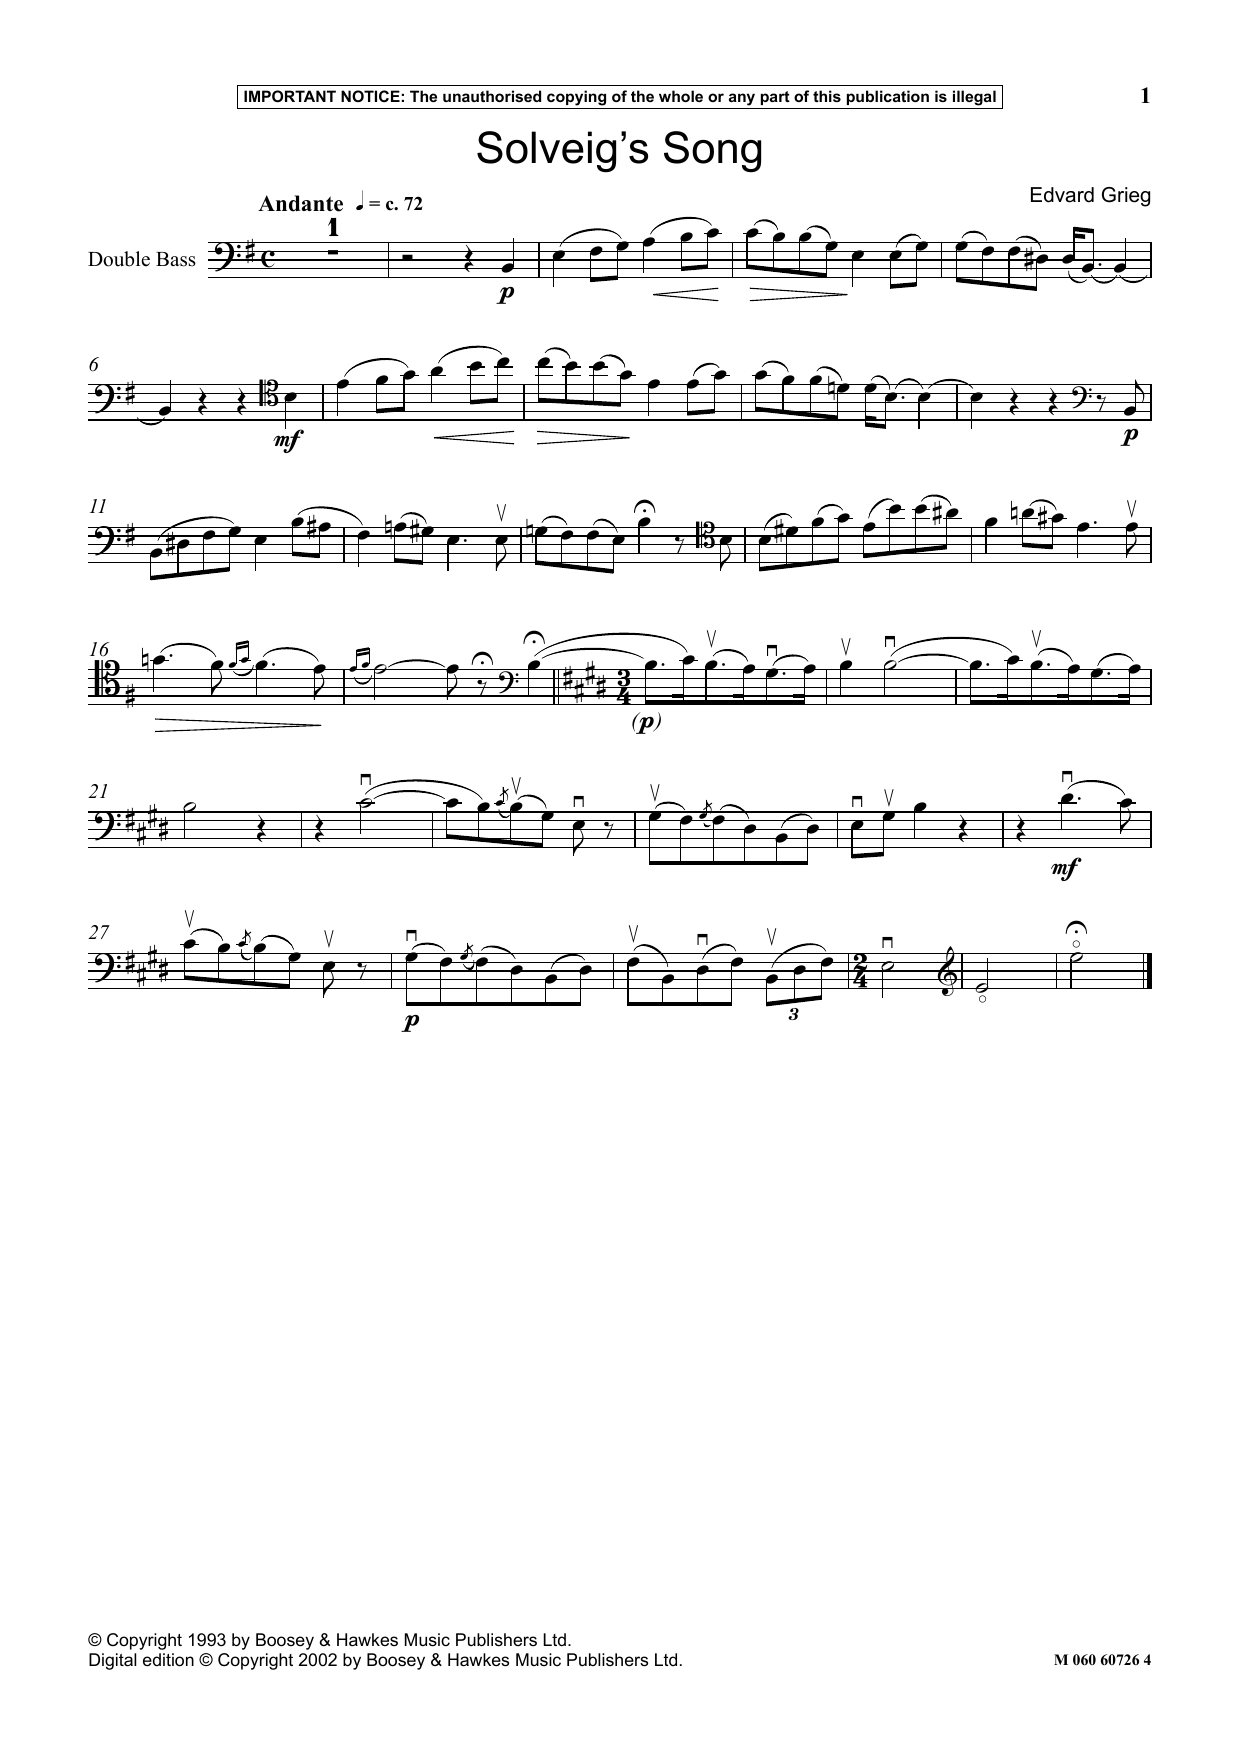 Solveig's Song sheet music